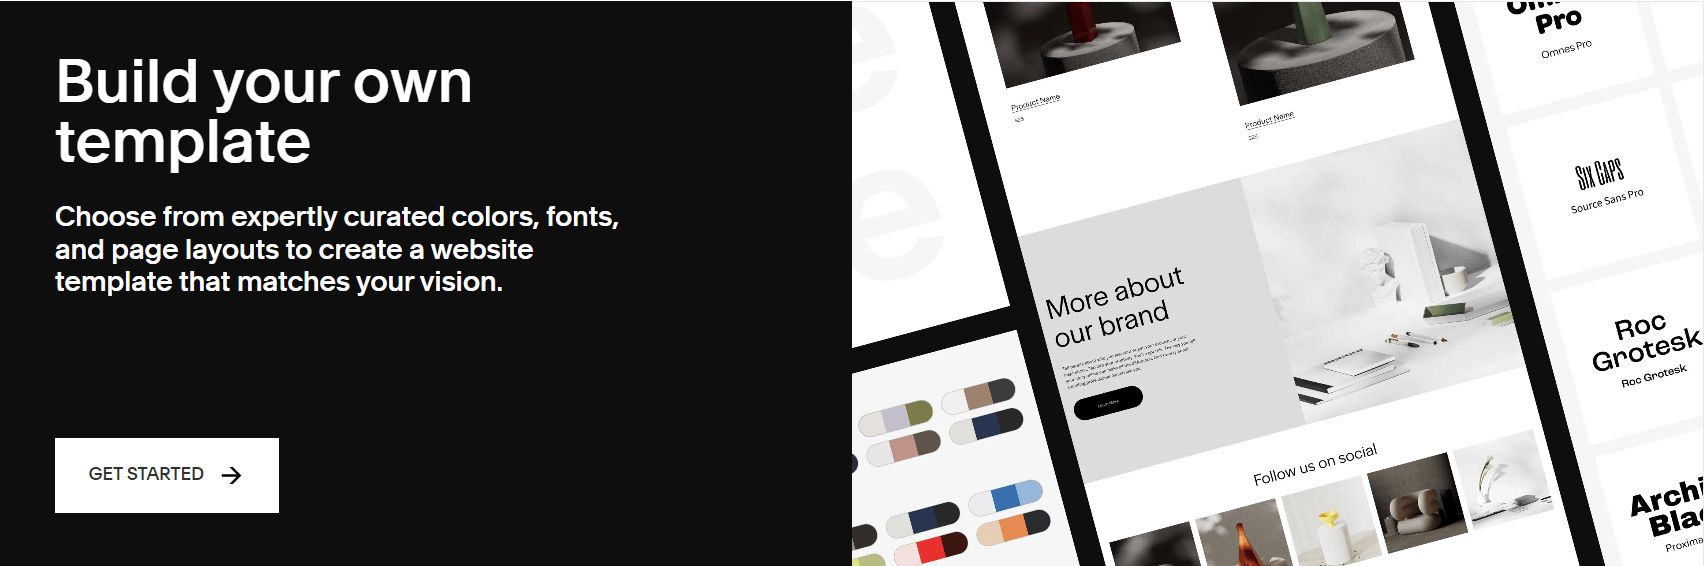 Squarespace - build your own template